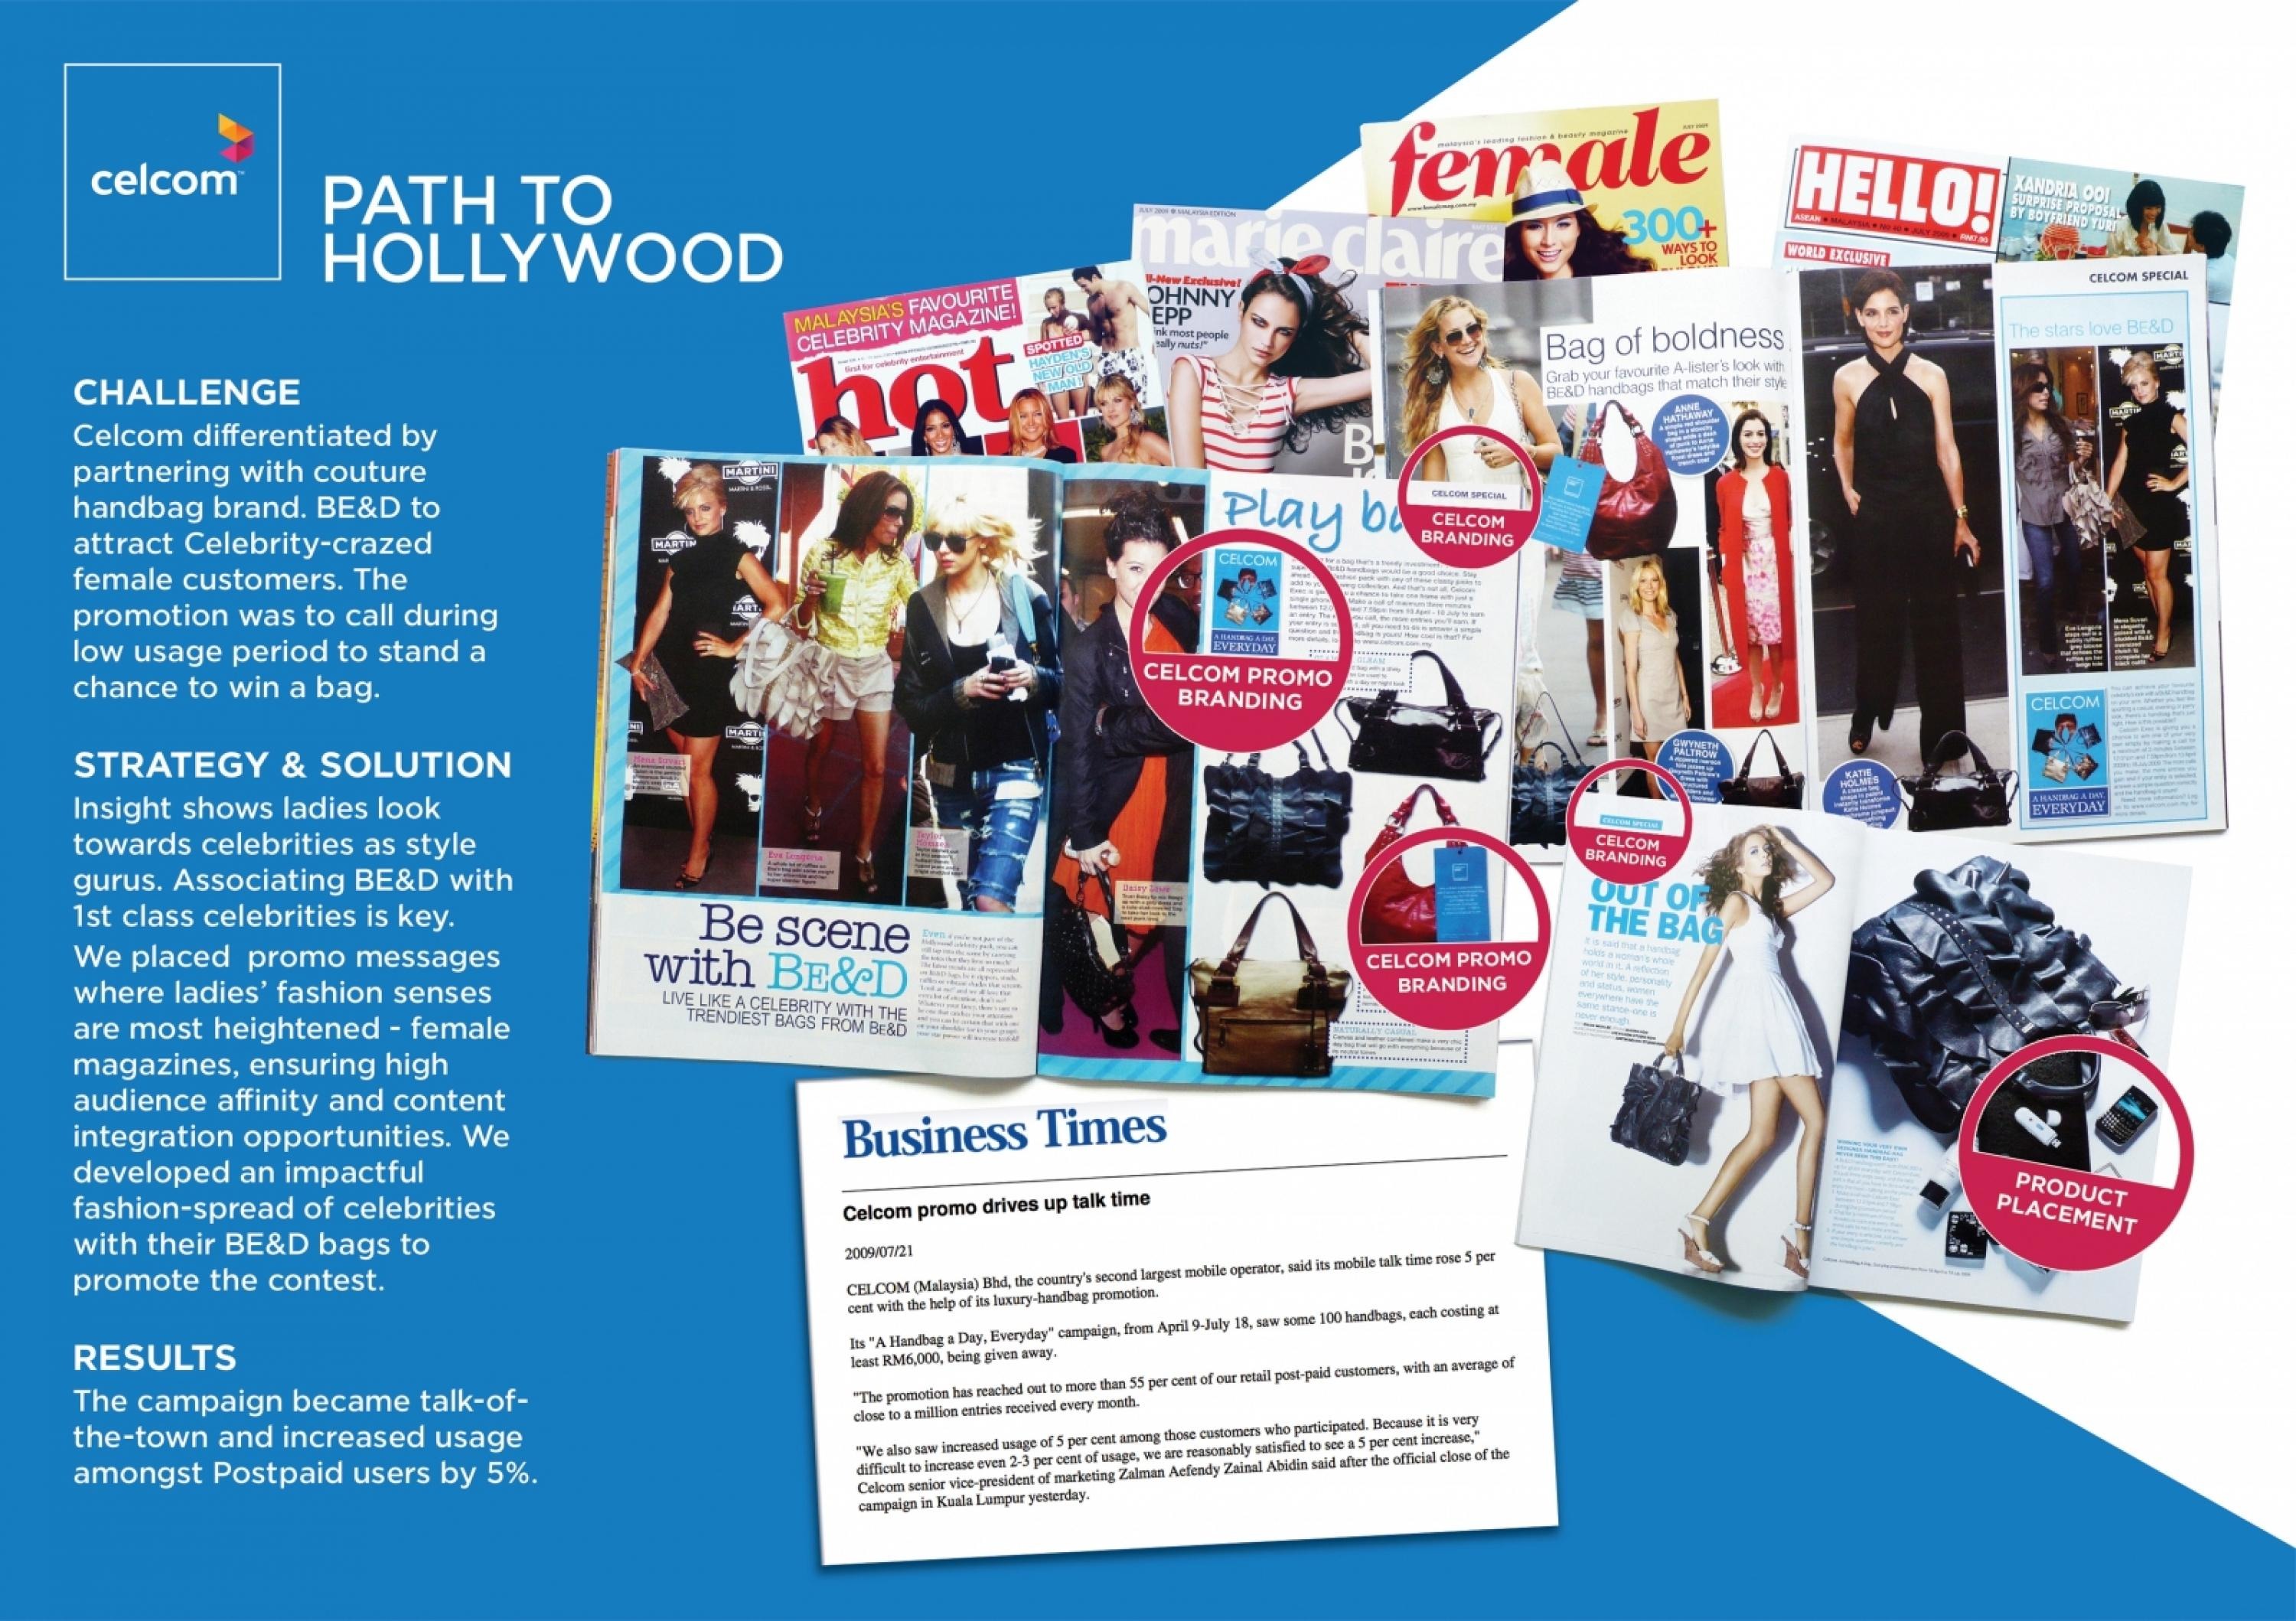 PATH TO HOLLYWOOD